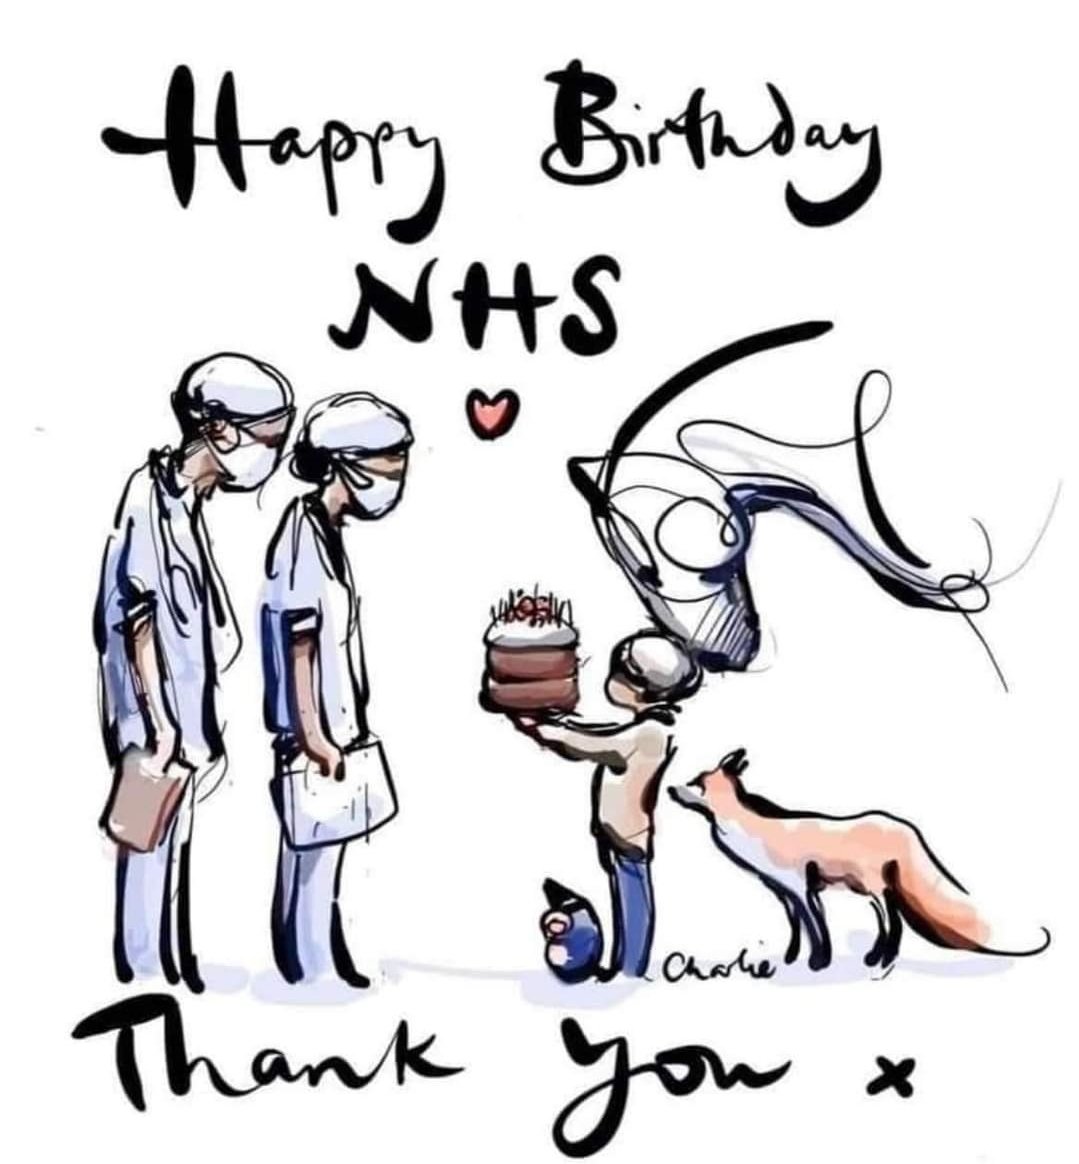 My service is 20 years this year. + 3 years training.  

The NHS is our greatest achievement as a nation. 

We CANNOT let these psychopaths destroy it. Neither red nor blue. 

It's ours. We have to fight for it. 

#NHSBirthday #NHS75Women #handsoffourNHS